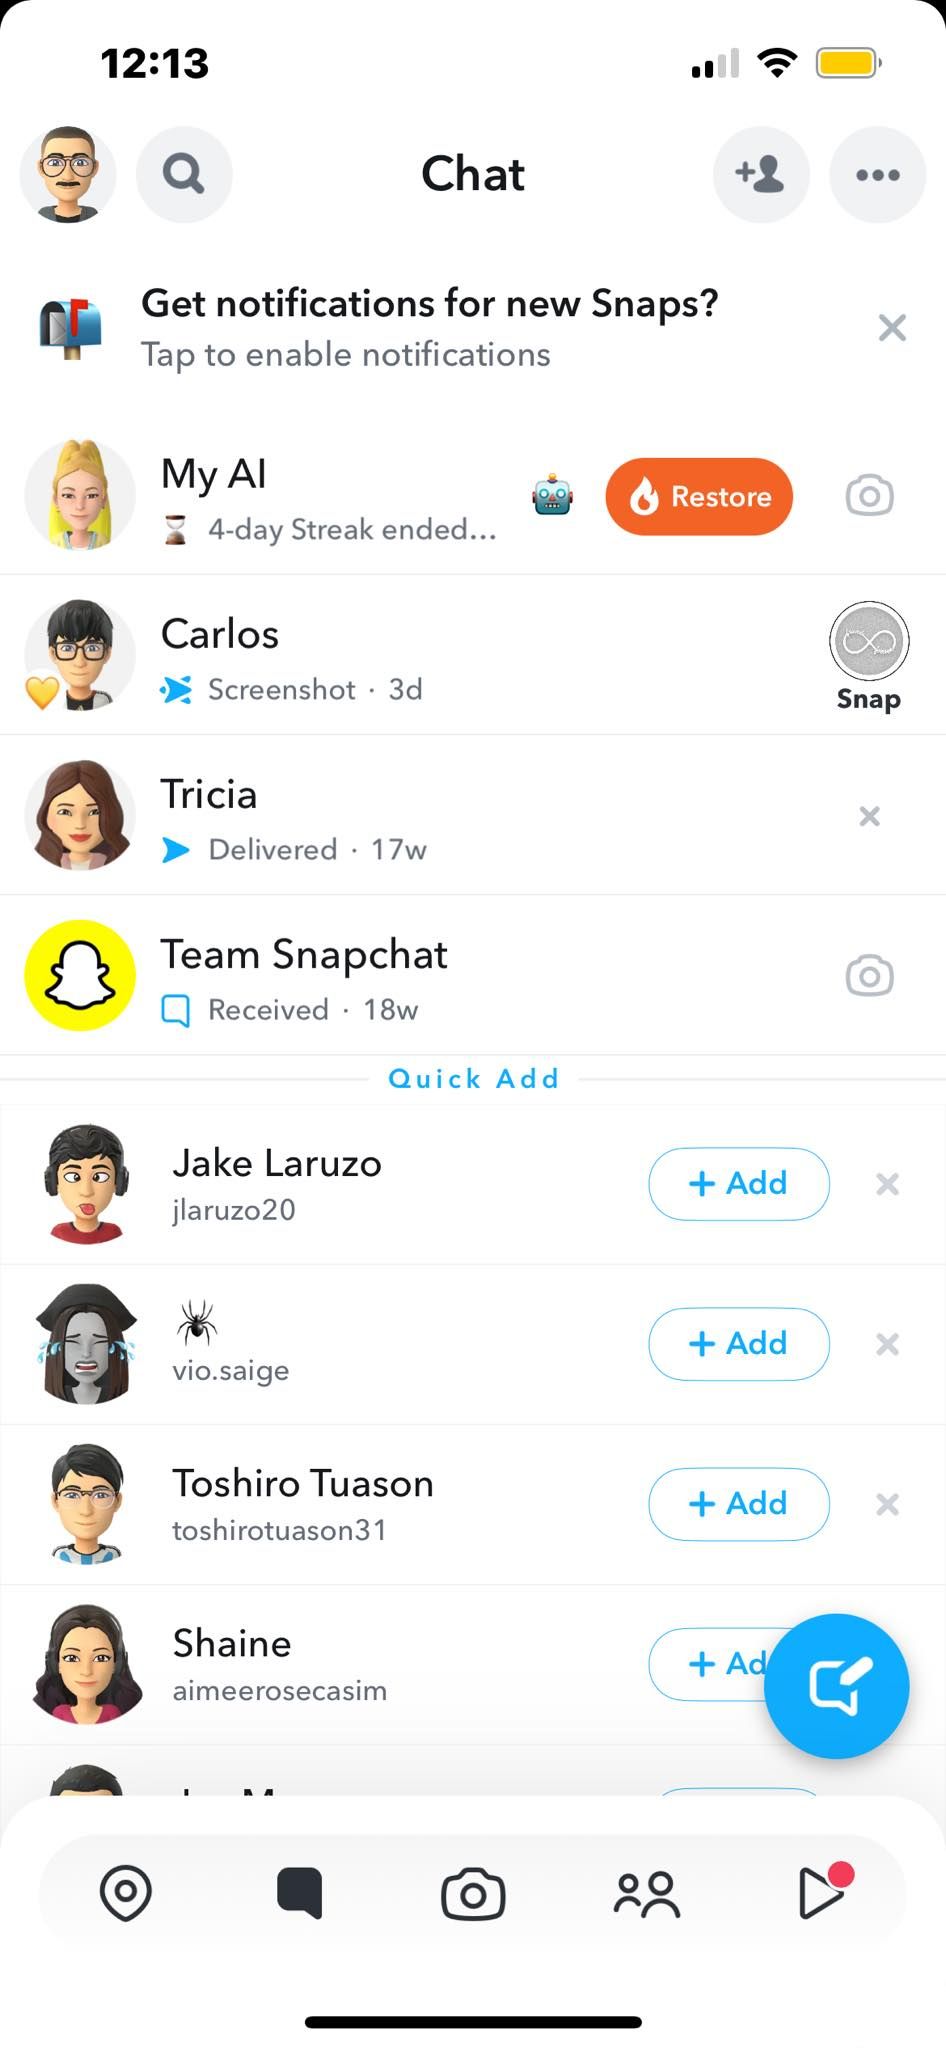 Snapstreak Restore Button in Chat Feed